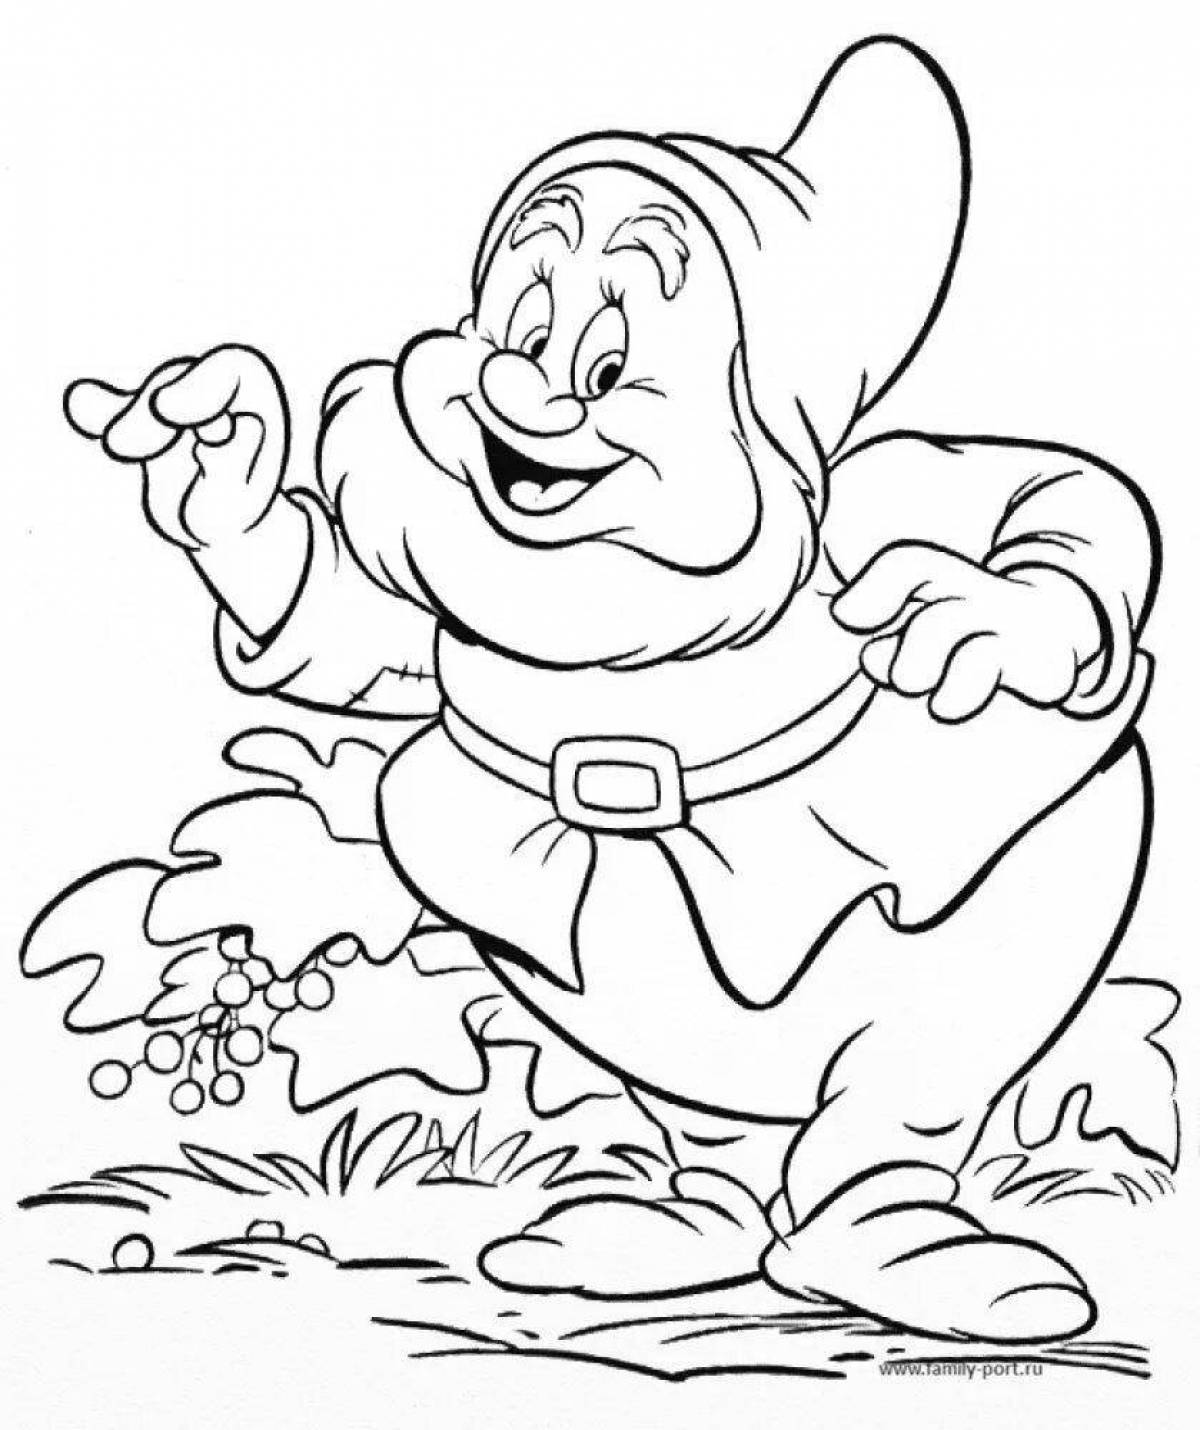 Seven Dwarfs holiday coloring page